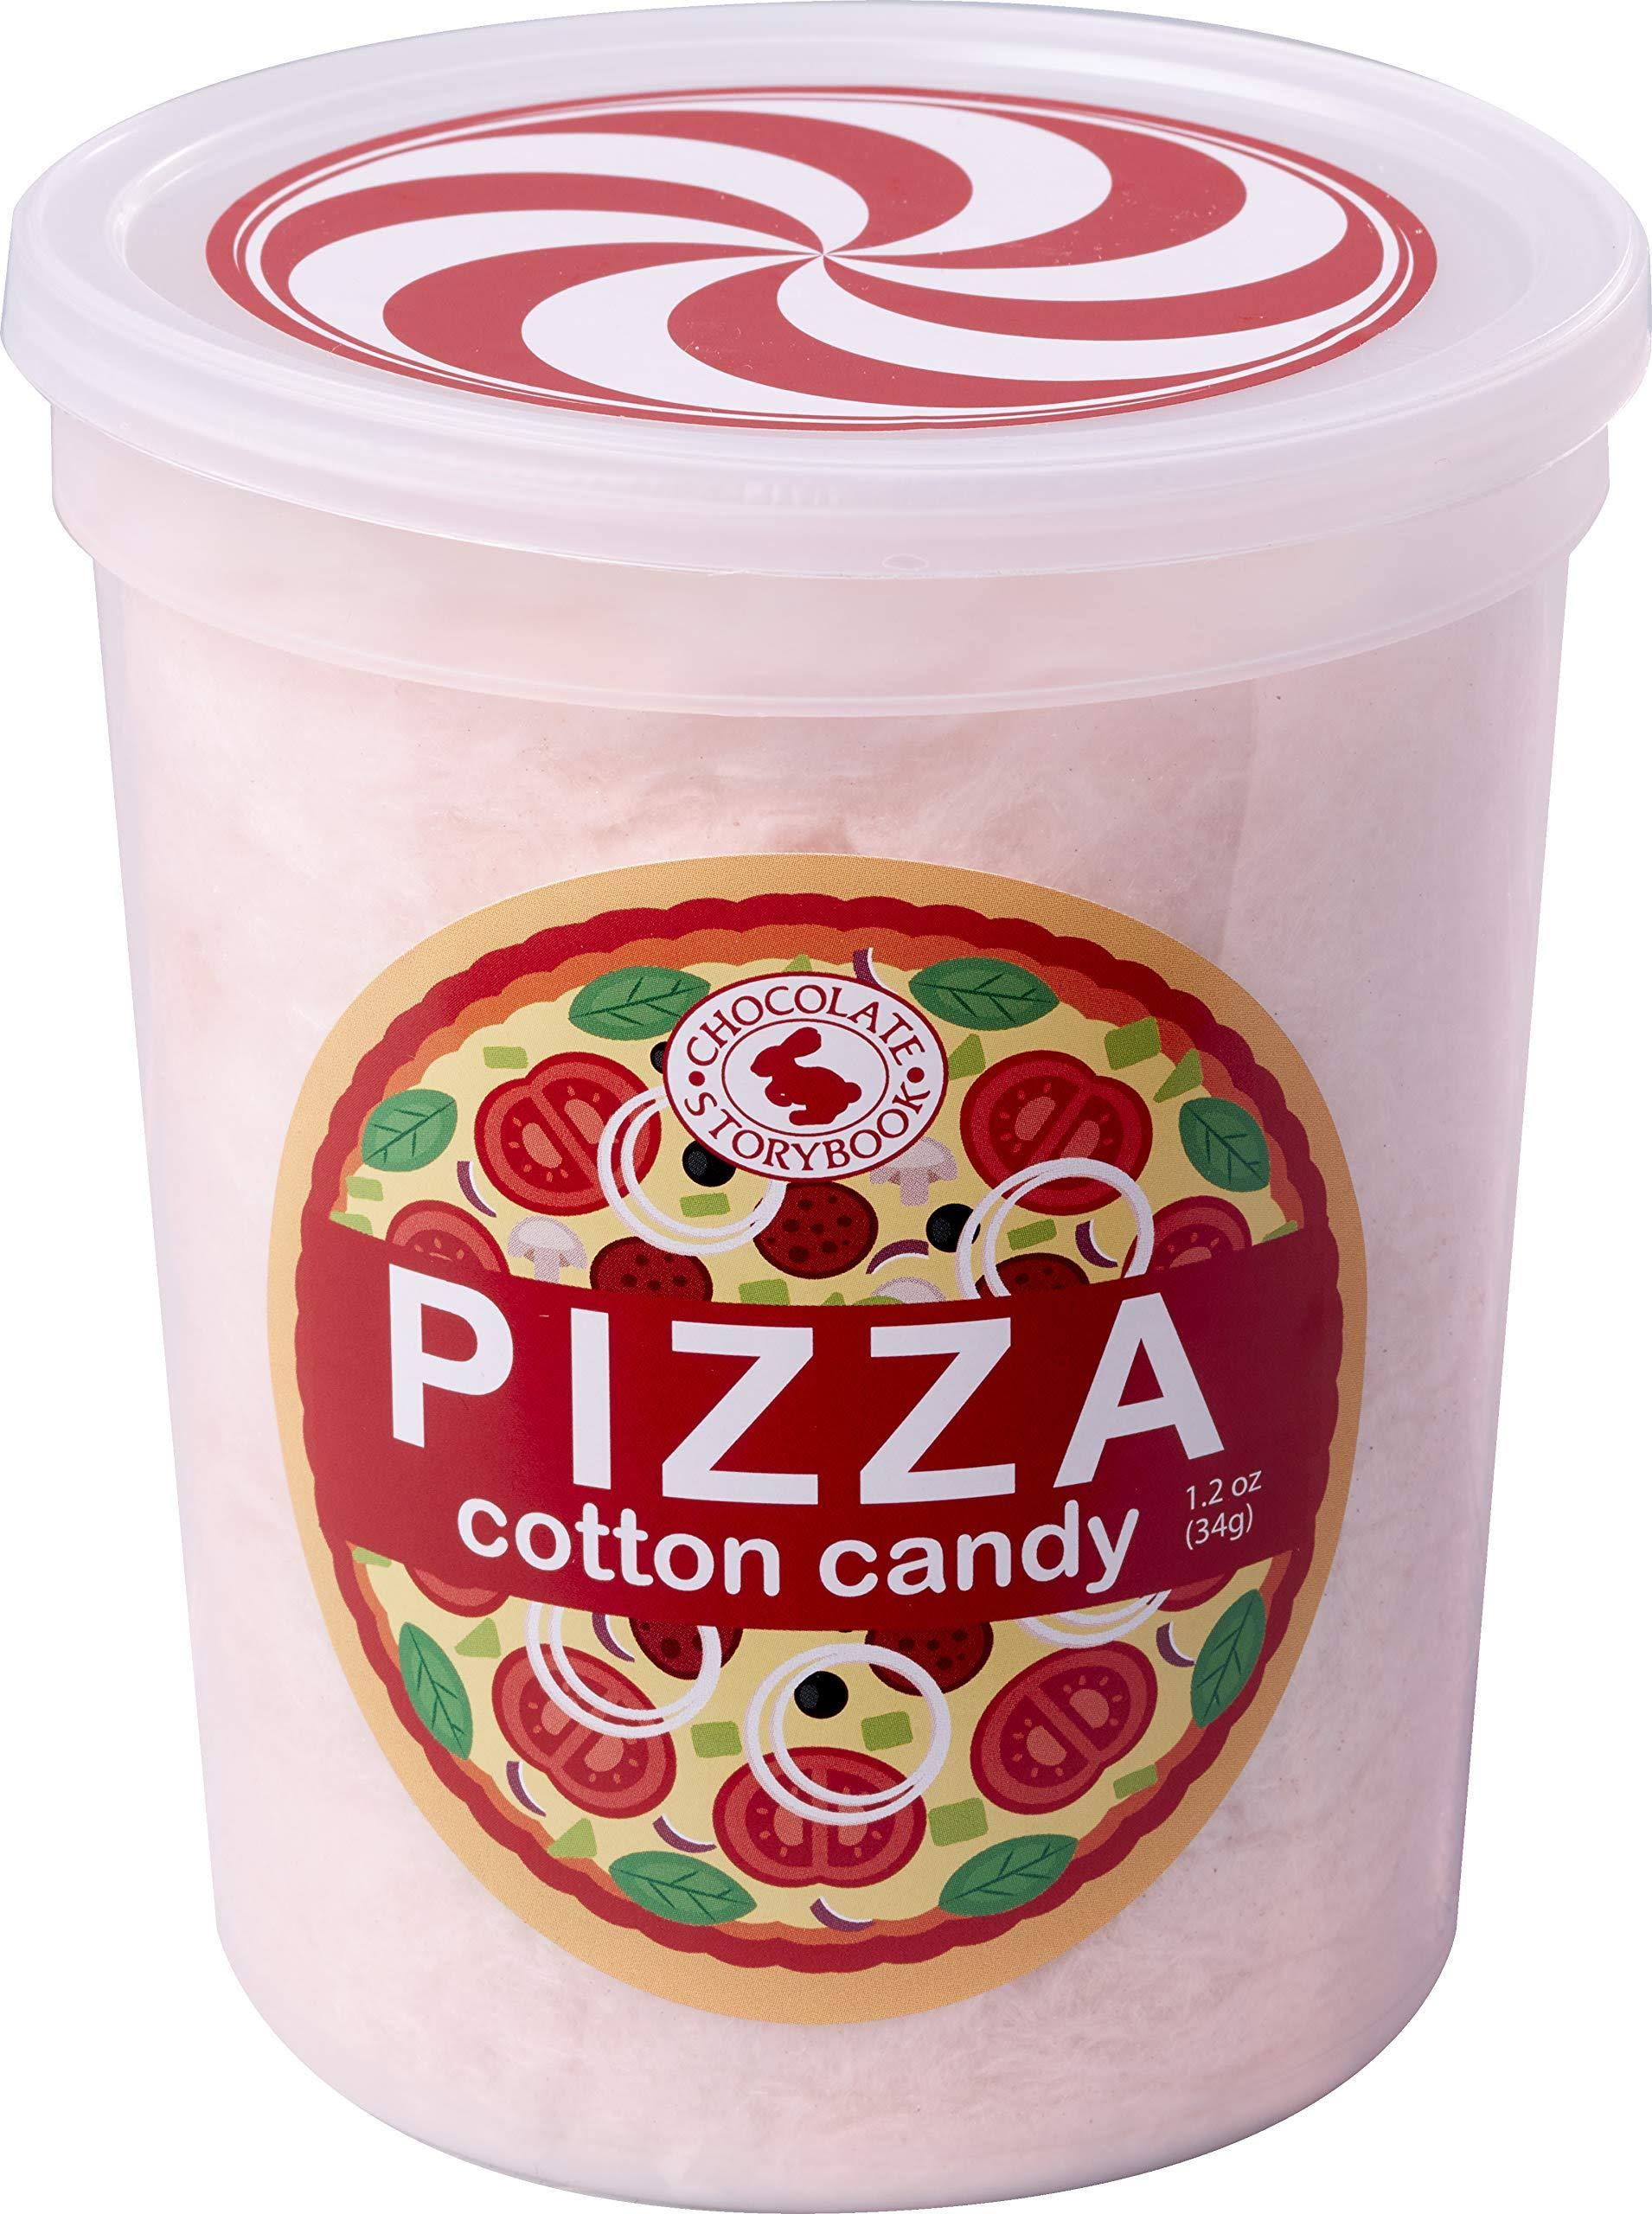 Chocolate Storybook Pizza Cotton Candy